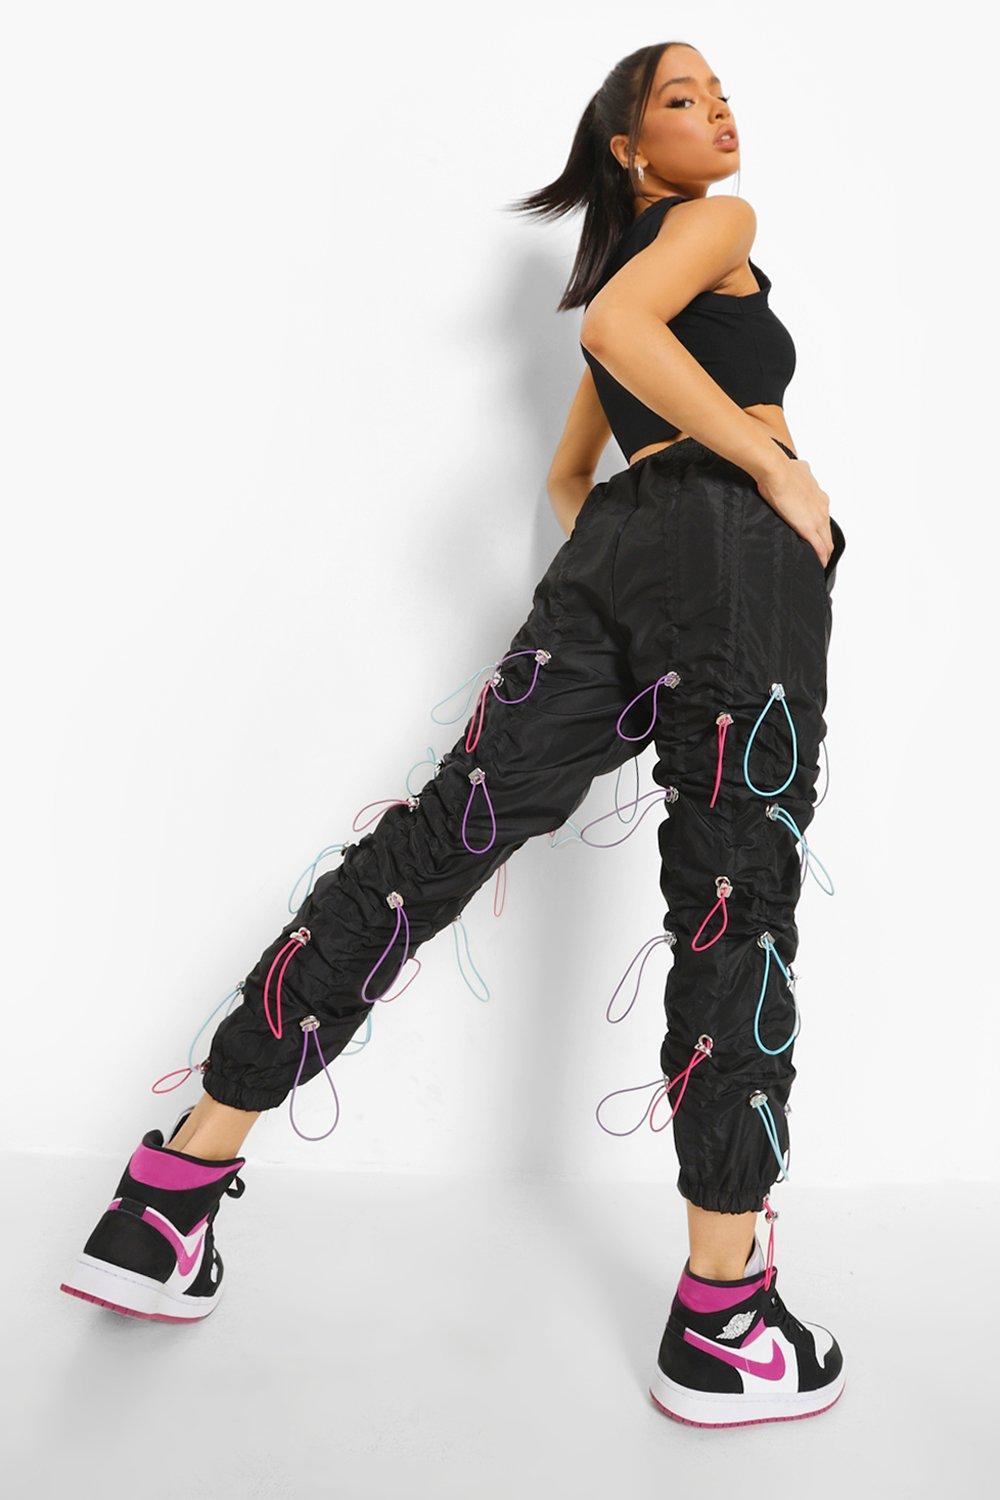 mnml  melo in our Bungee Cord Pants  Available now on  Facebook